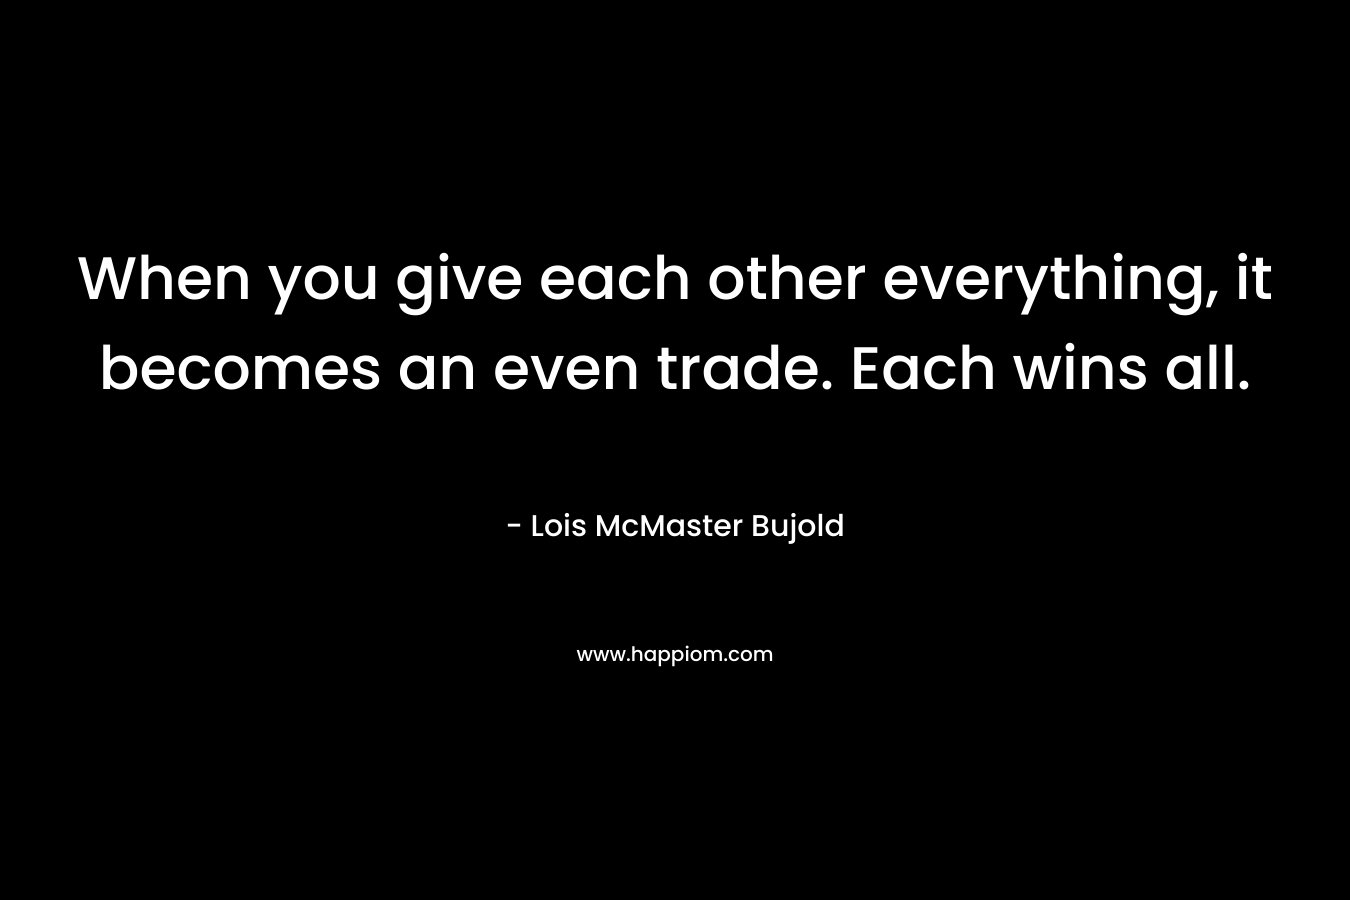 When you give each other everything, it becomes an even trade. Each wins all.